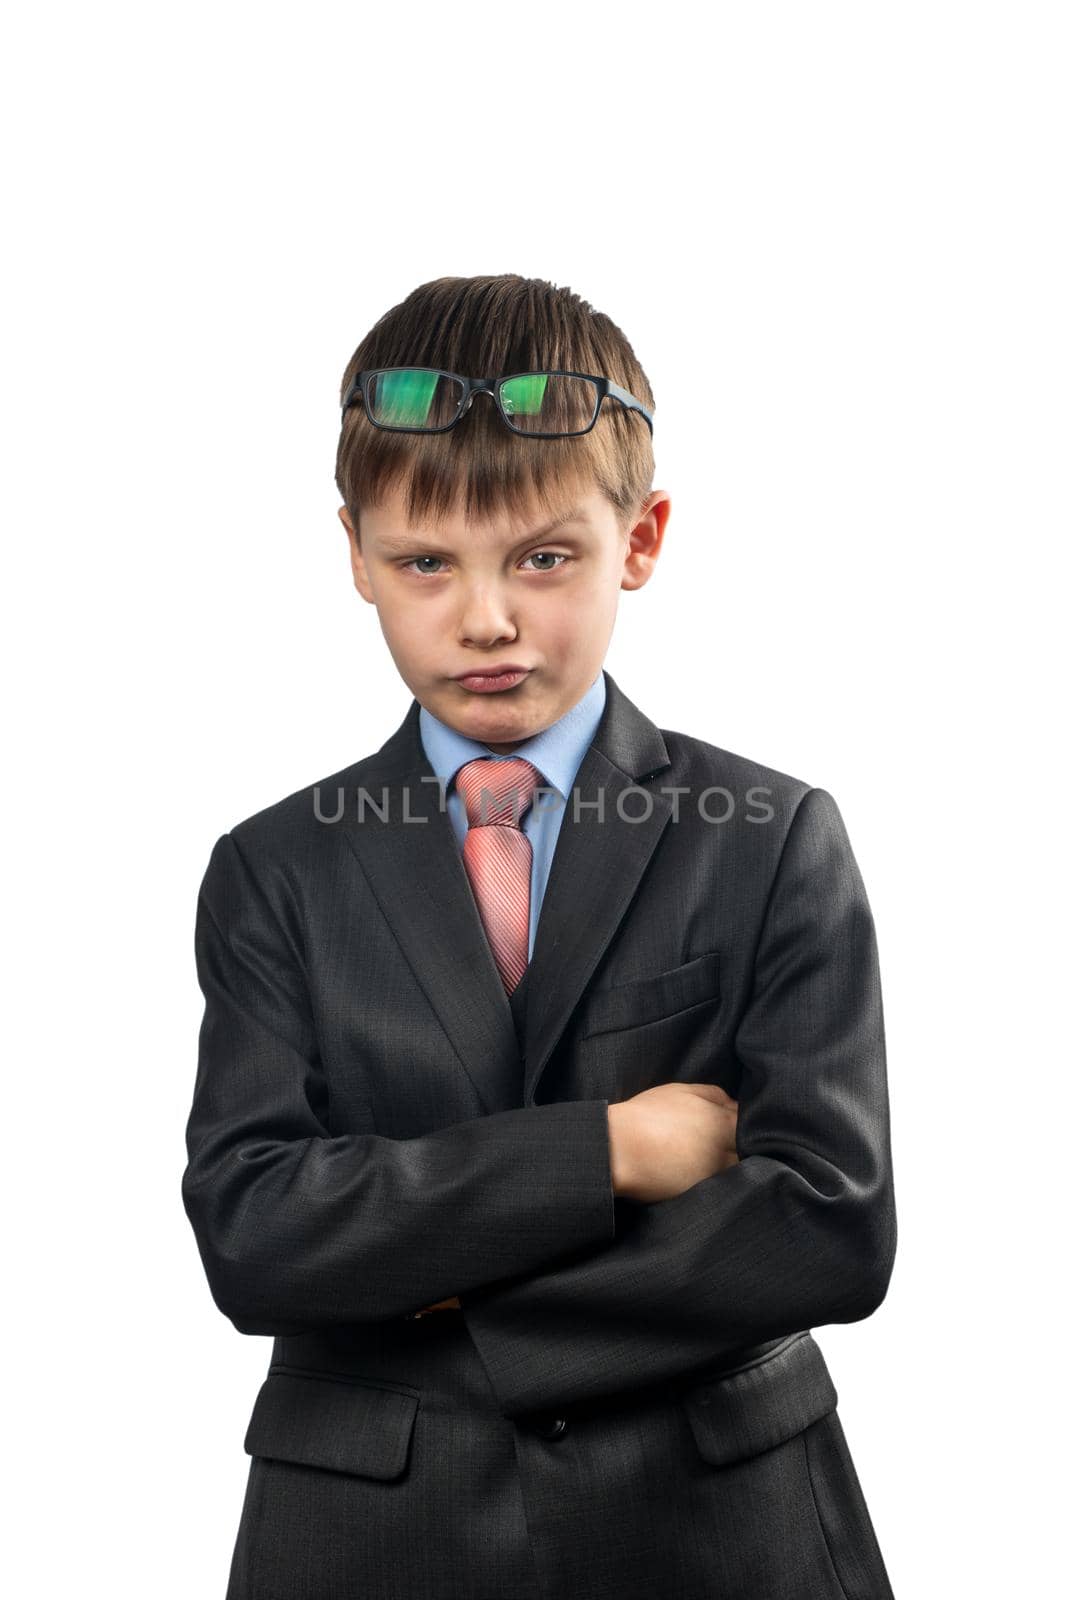 Portrait of a schoolboy making these faces on a white background